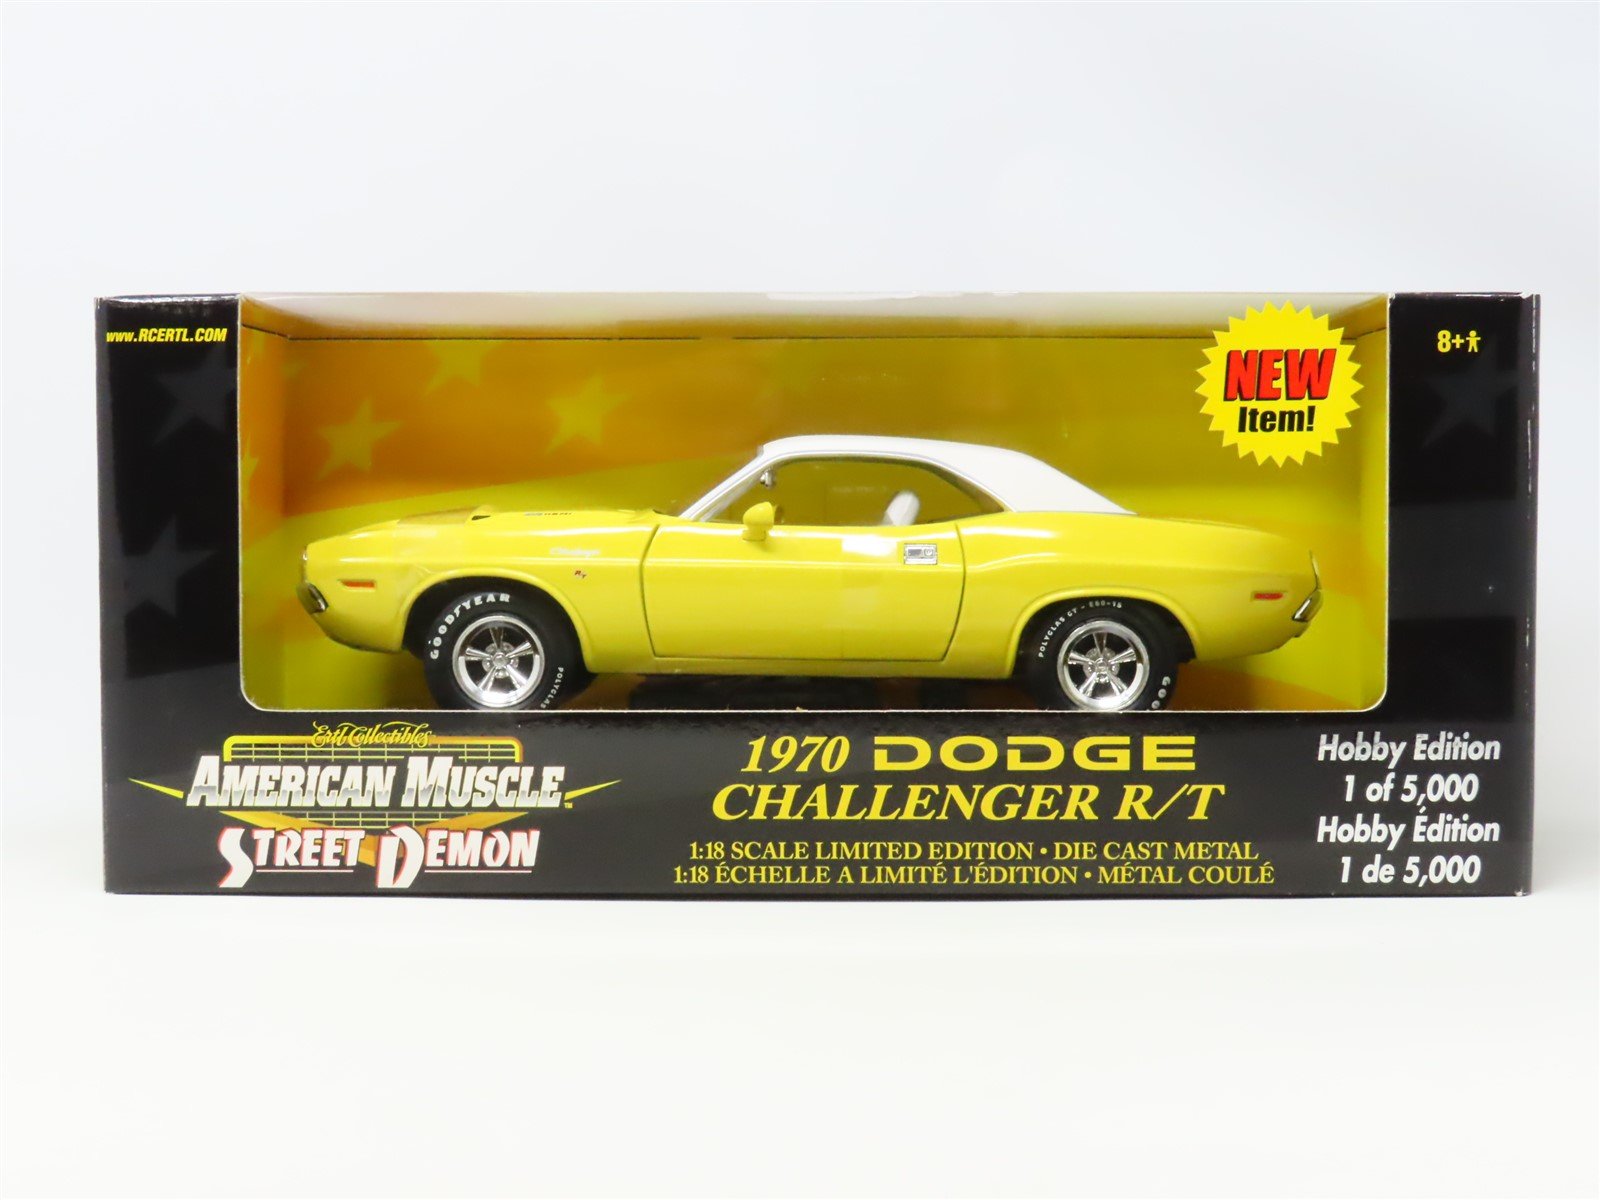 1:18 Scale RC Ertl American Muscle #36991 Street Demon 1970 Dodge Challenger R/T